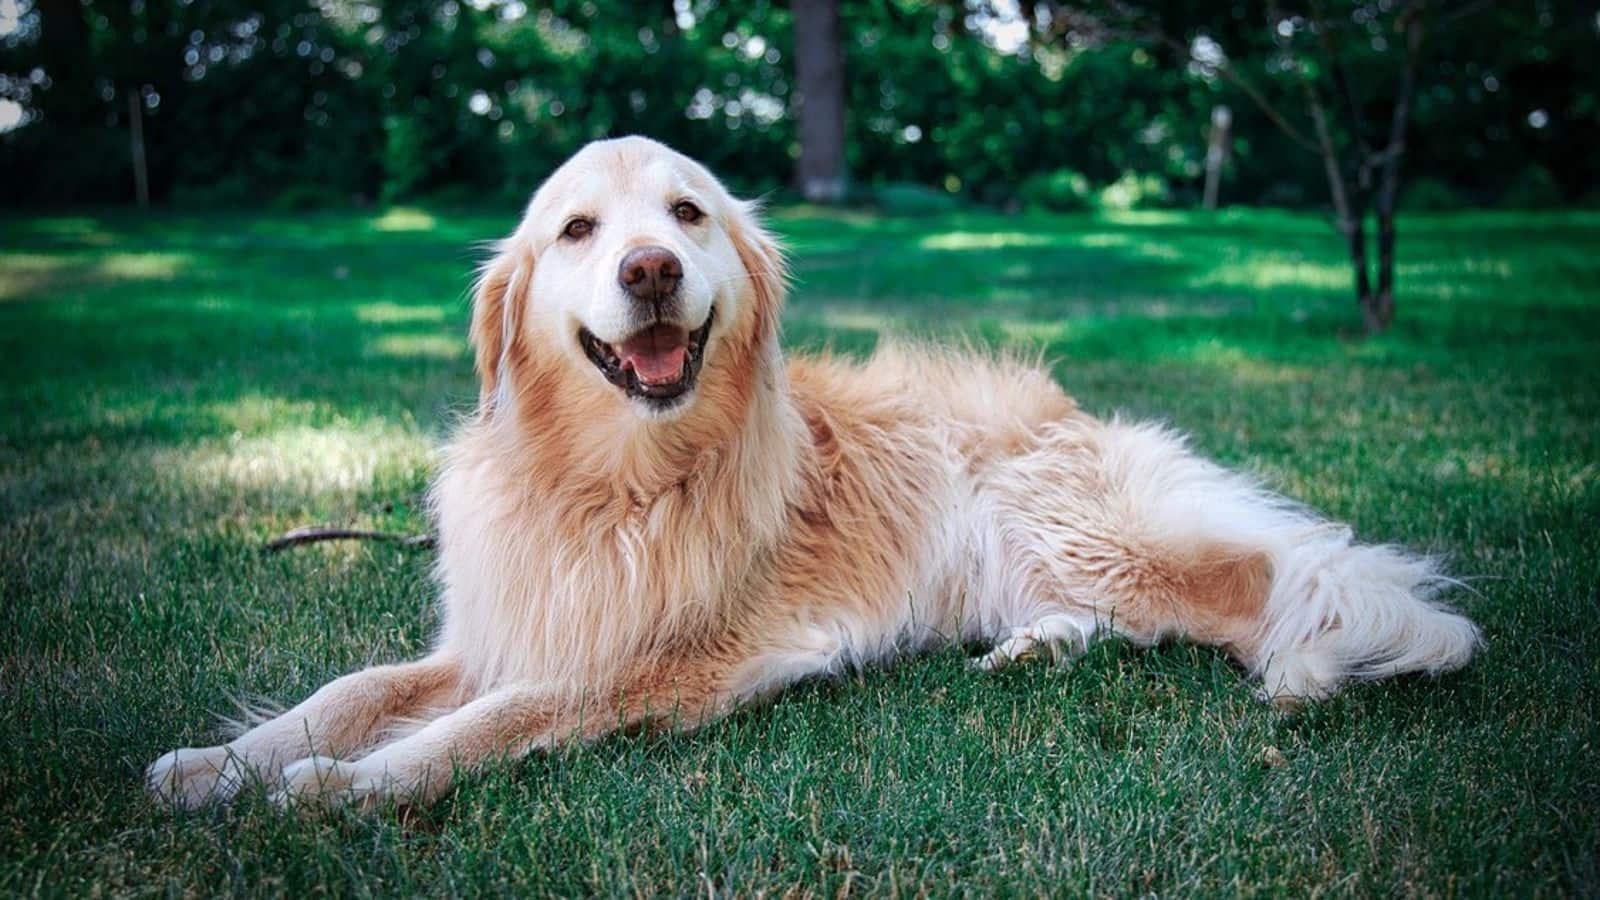 Find out Golden Retriever's shedding management tips here